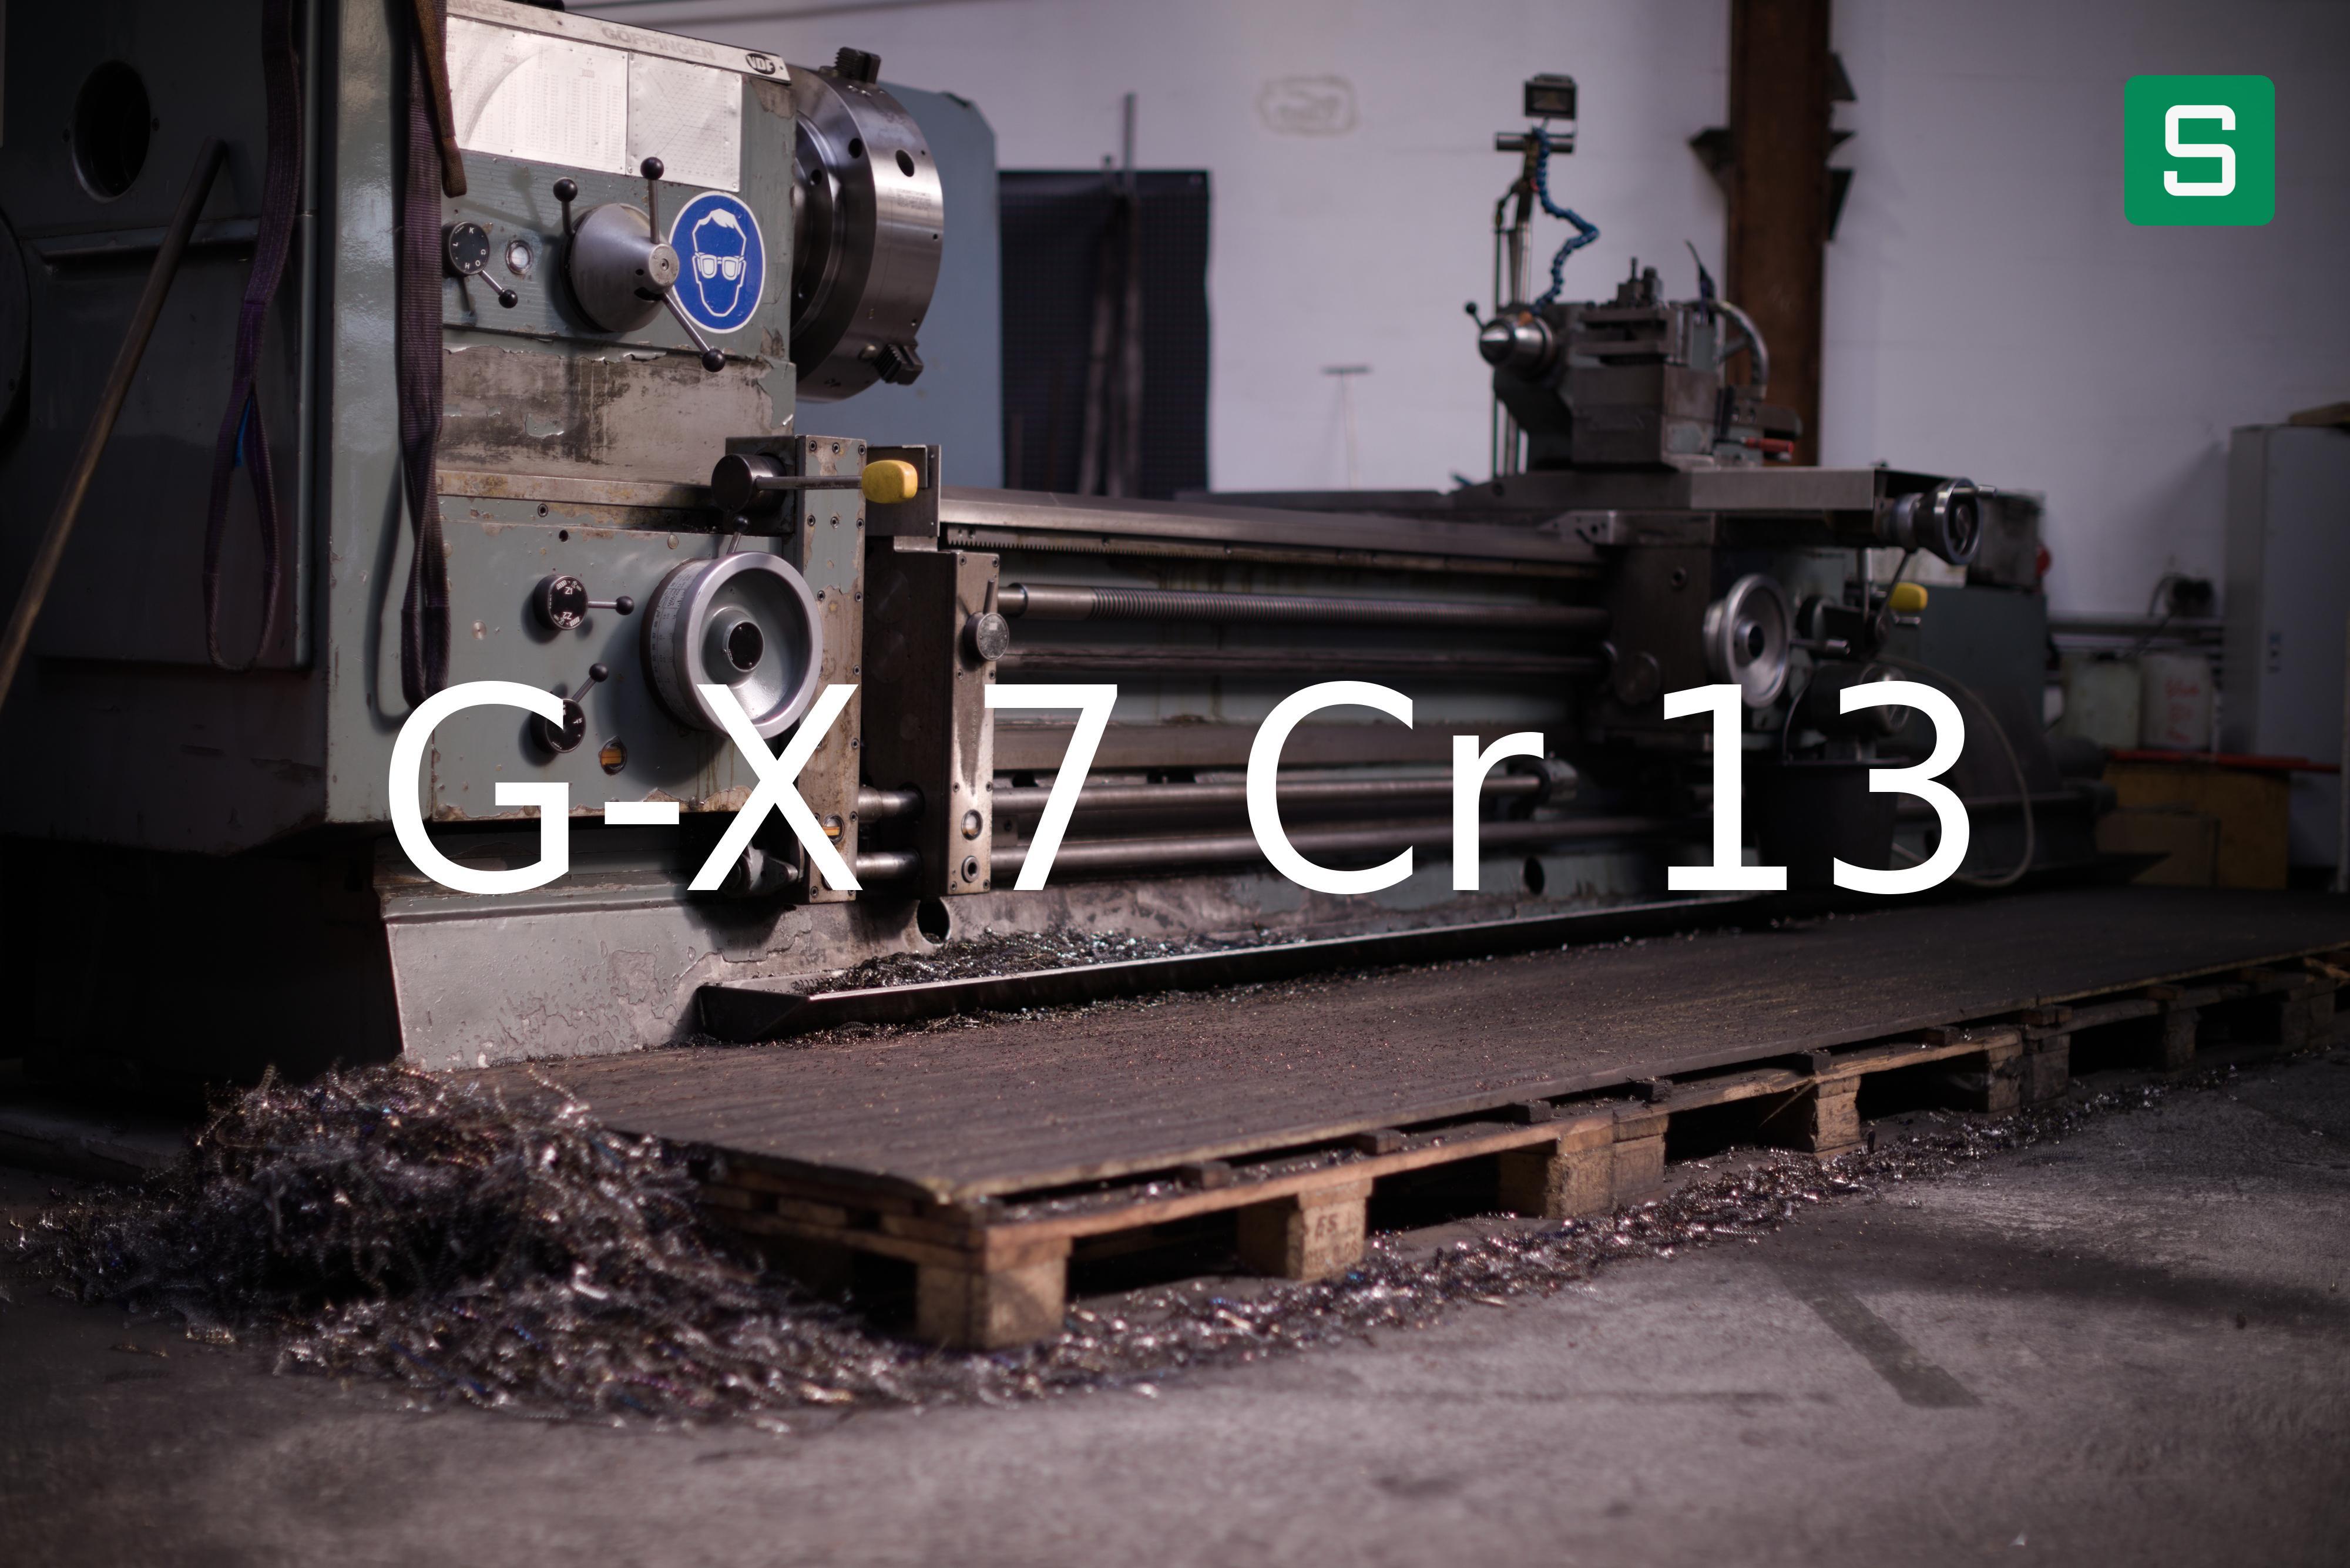 Steel Material: G-X 7 Cr 13